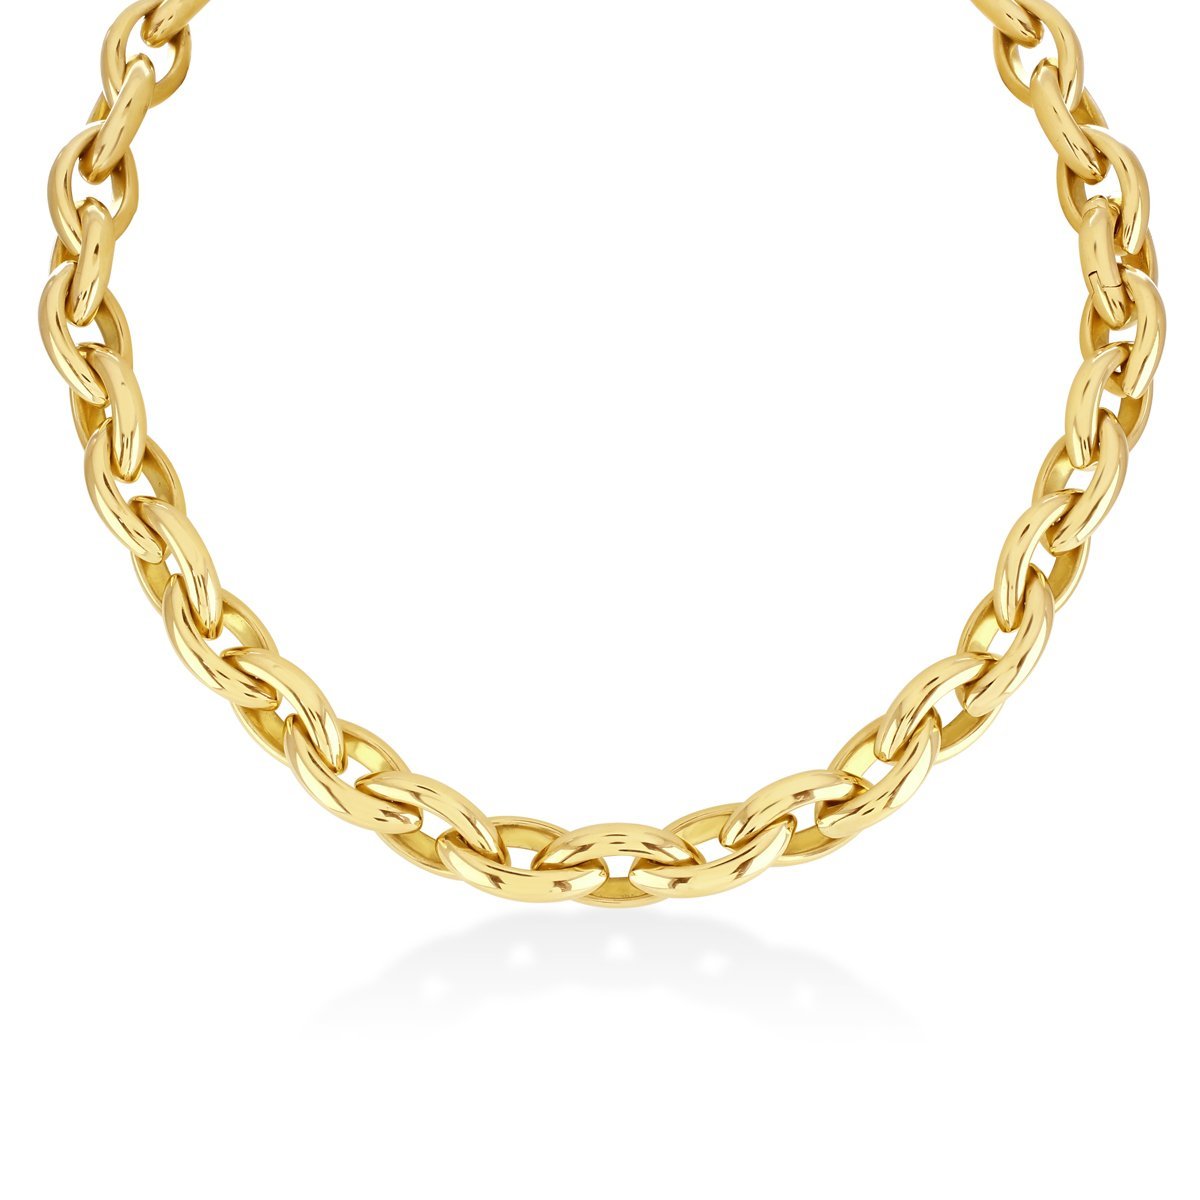 Giallo Yellow Gold Marquise Link Bracelet